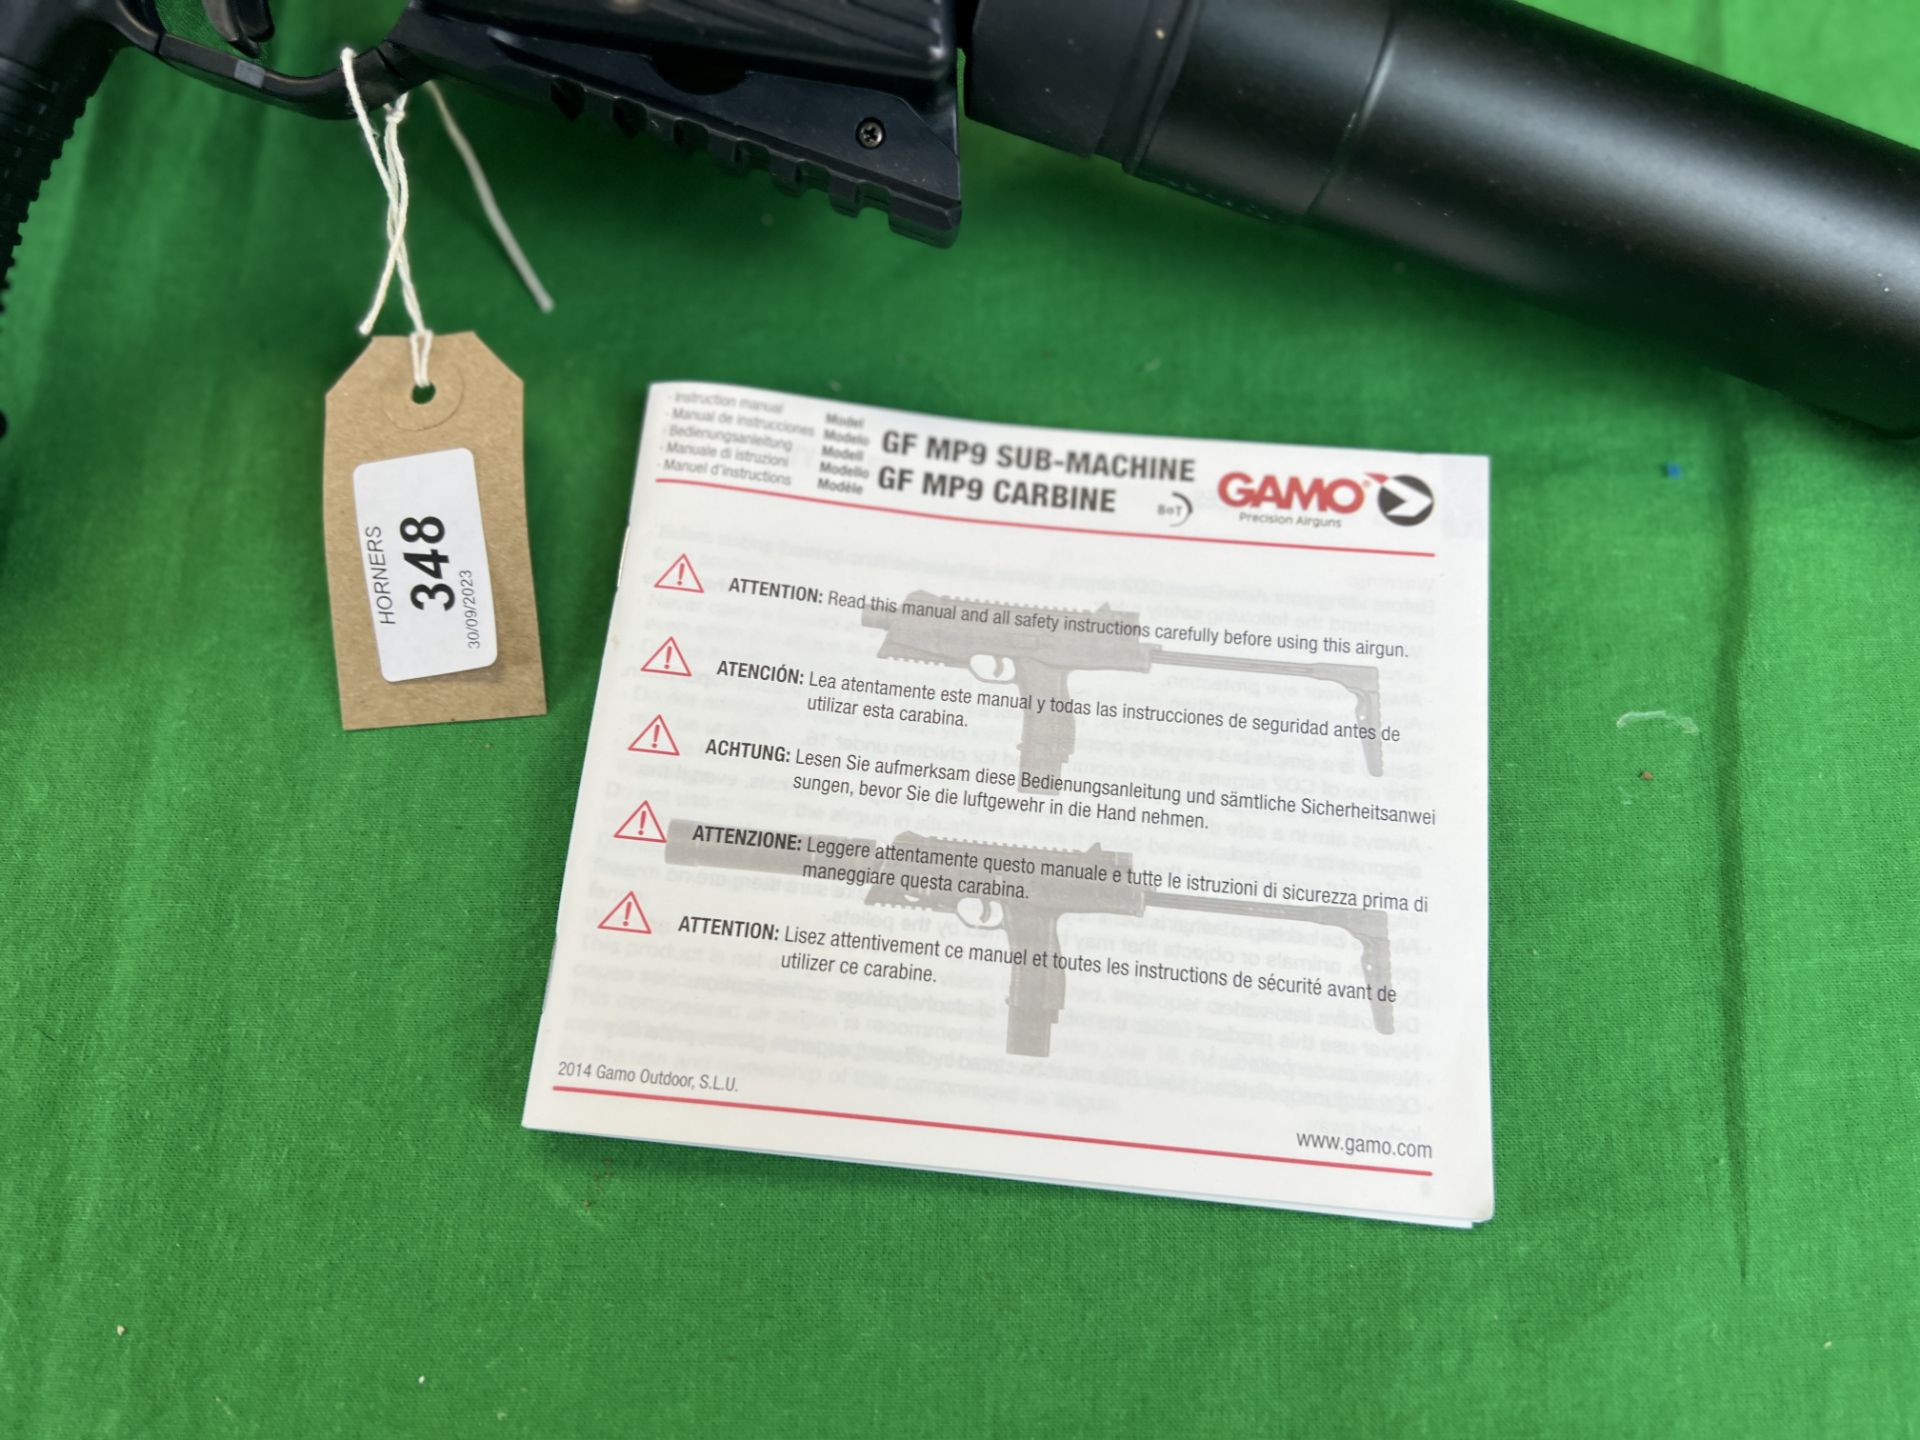 GAMO GF MP9 CARBINE Co2 TACTICAL BLOWBACK CARBINE PELLET AND BB RIFLE WITH ORIGINAL BOX - (ALL GUNS - Image 4 of 9